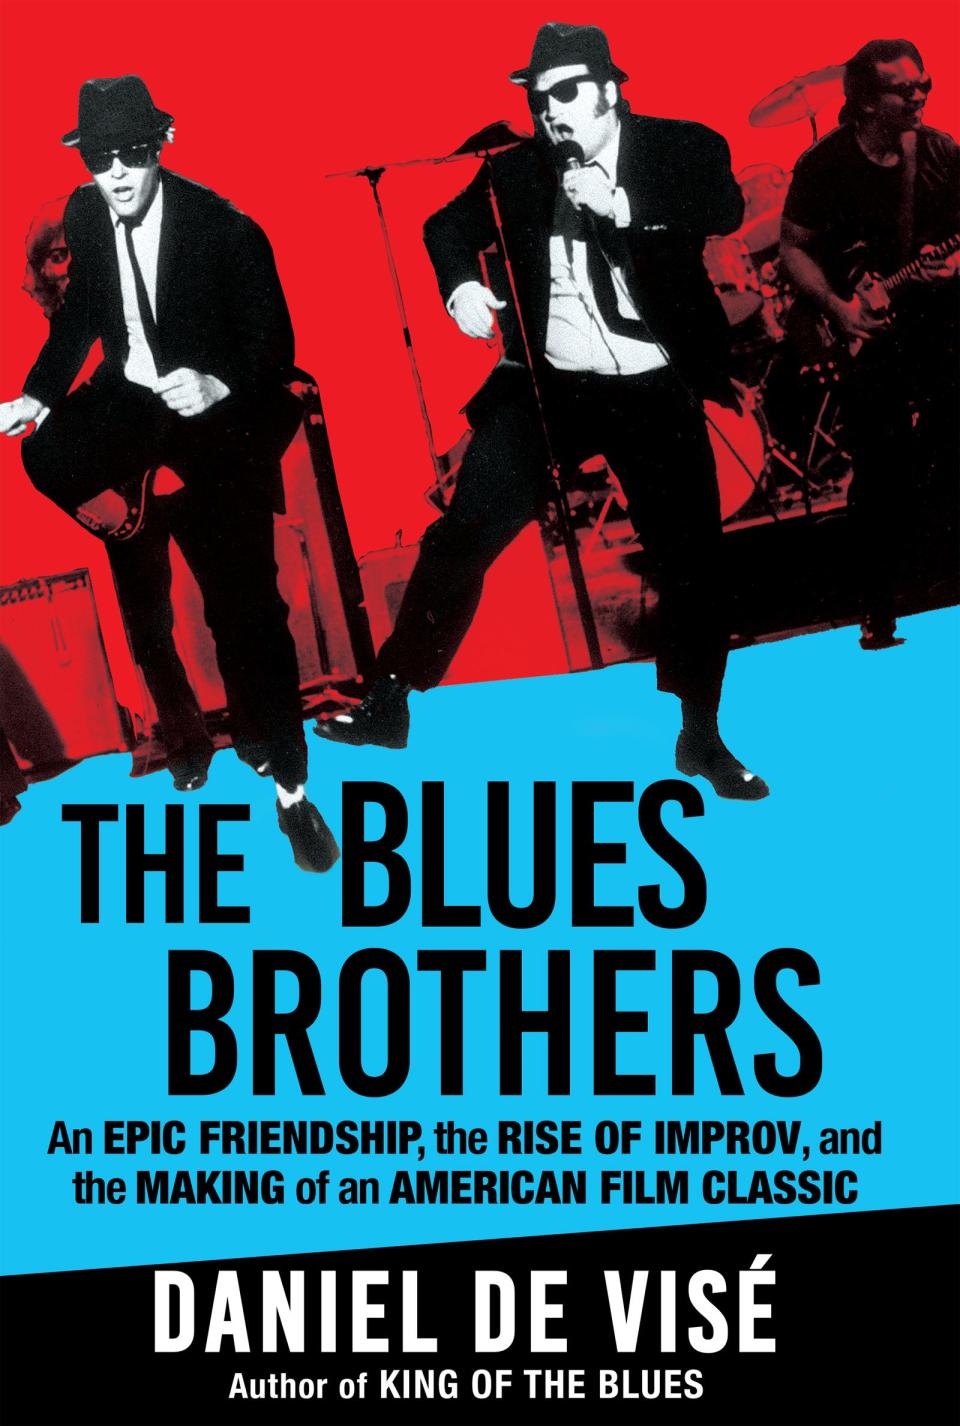 "The Blues Brothers: An Epic Friendship, the Rise of Improv and the Making of an American Film Classic" by Daniel de Visé.